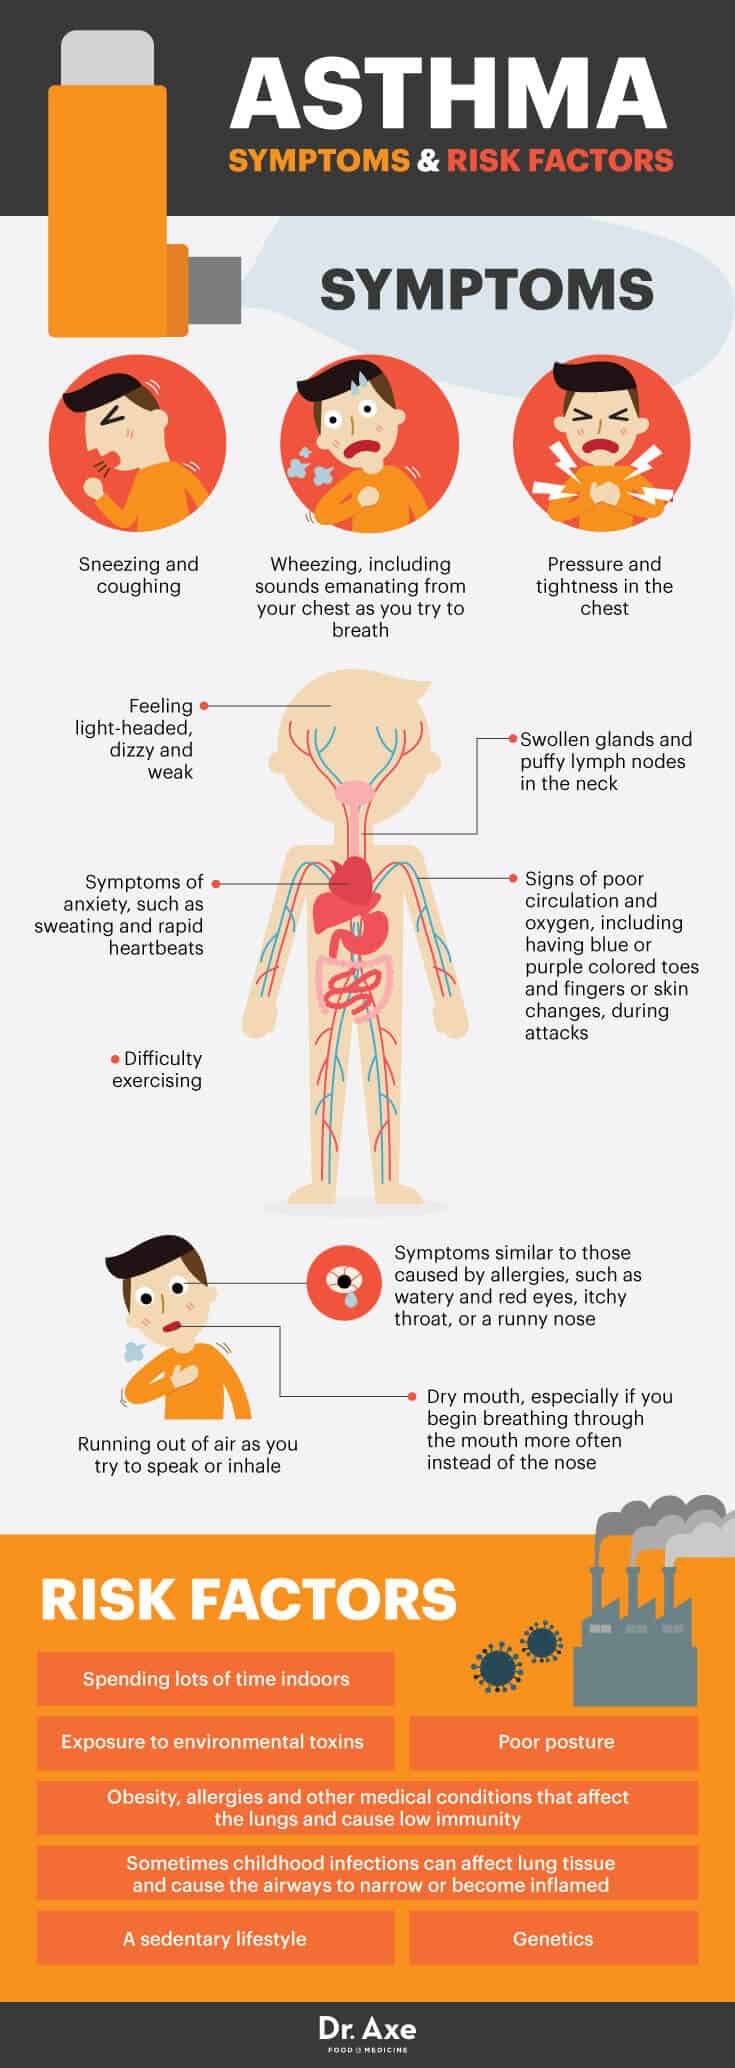 Asthma symptoms and risk factors - Dr. Axe